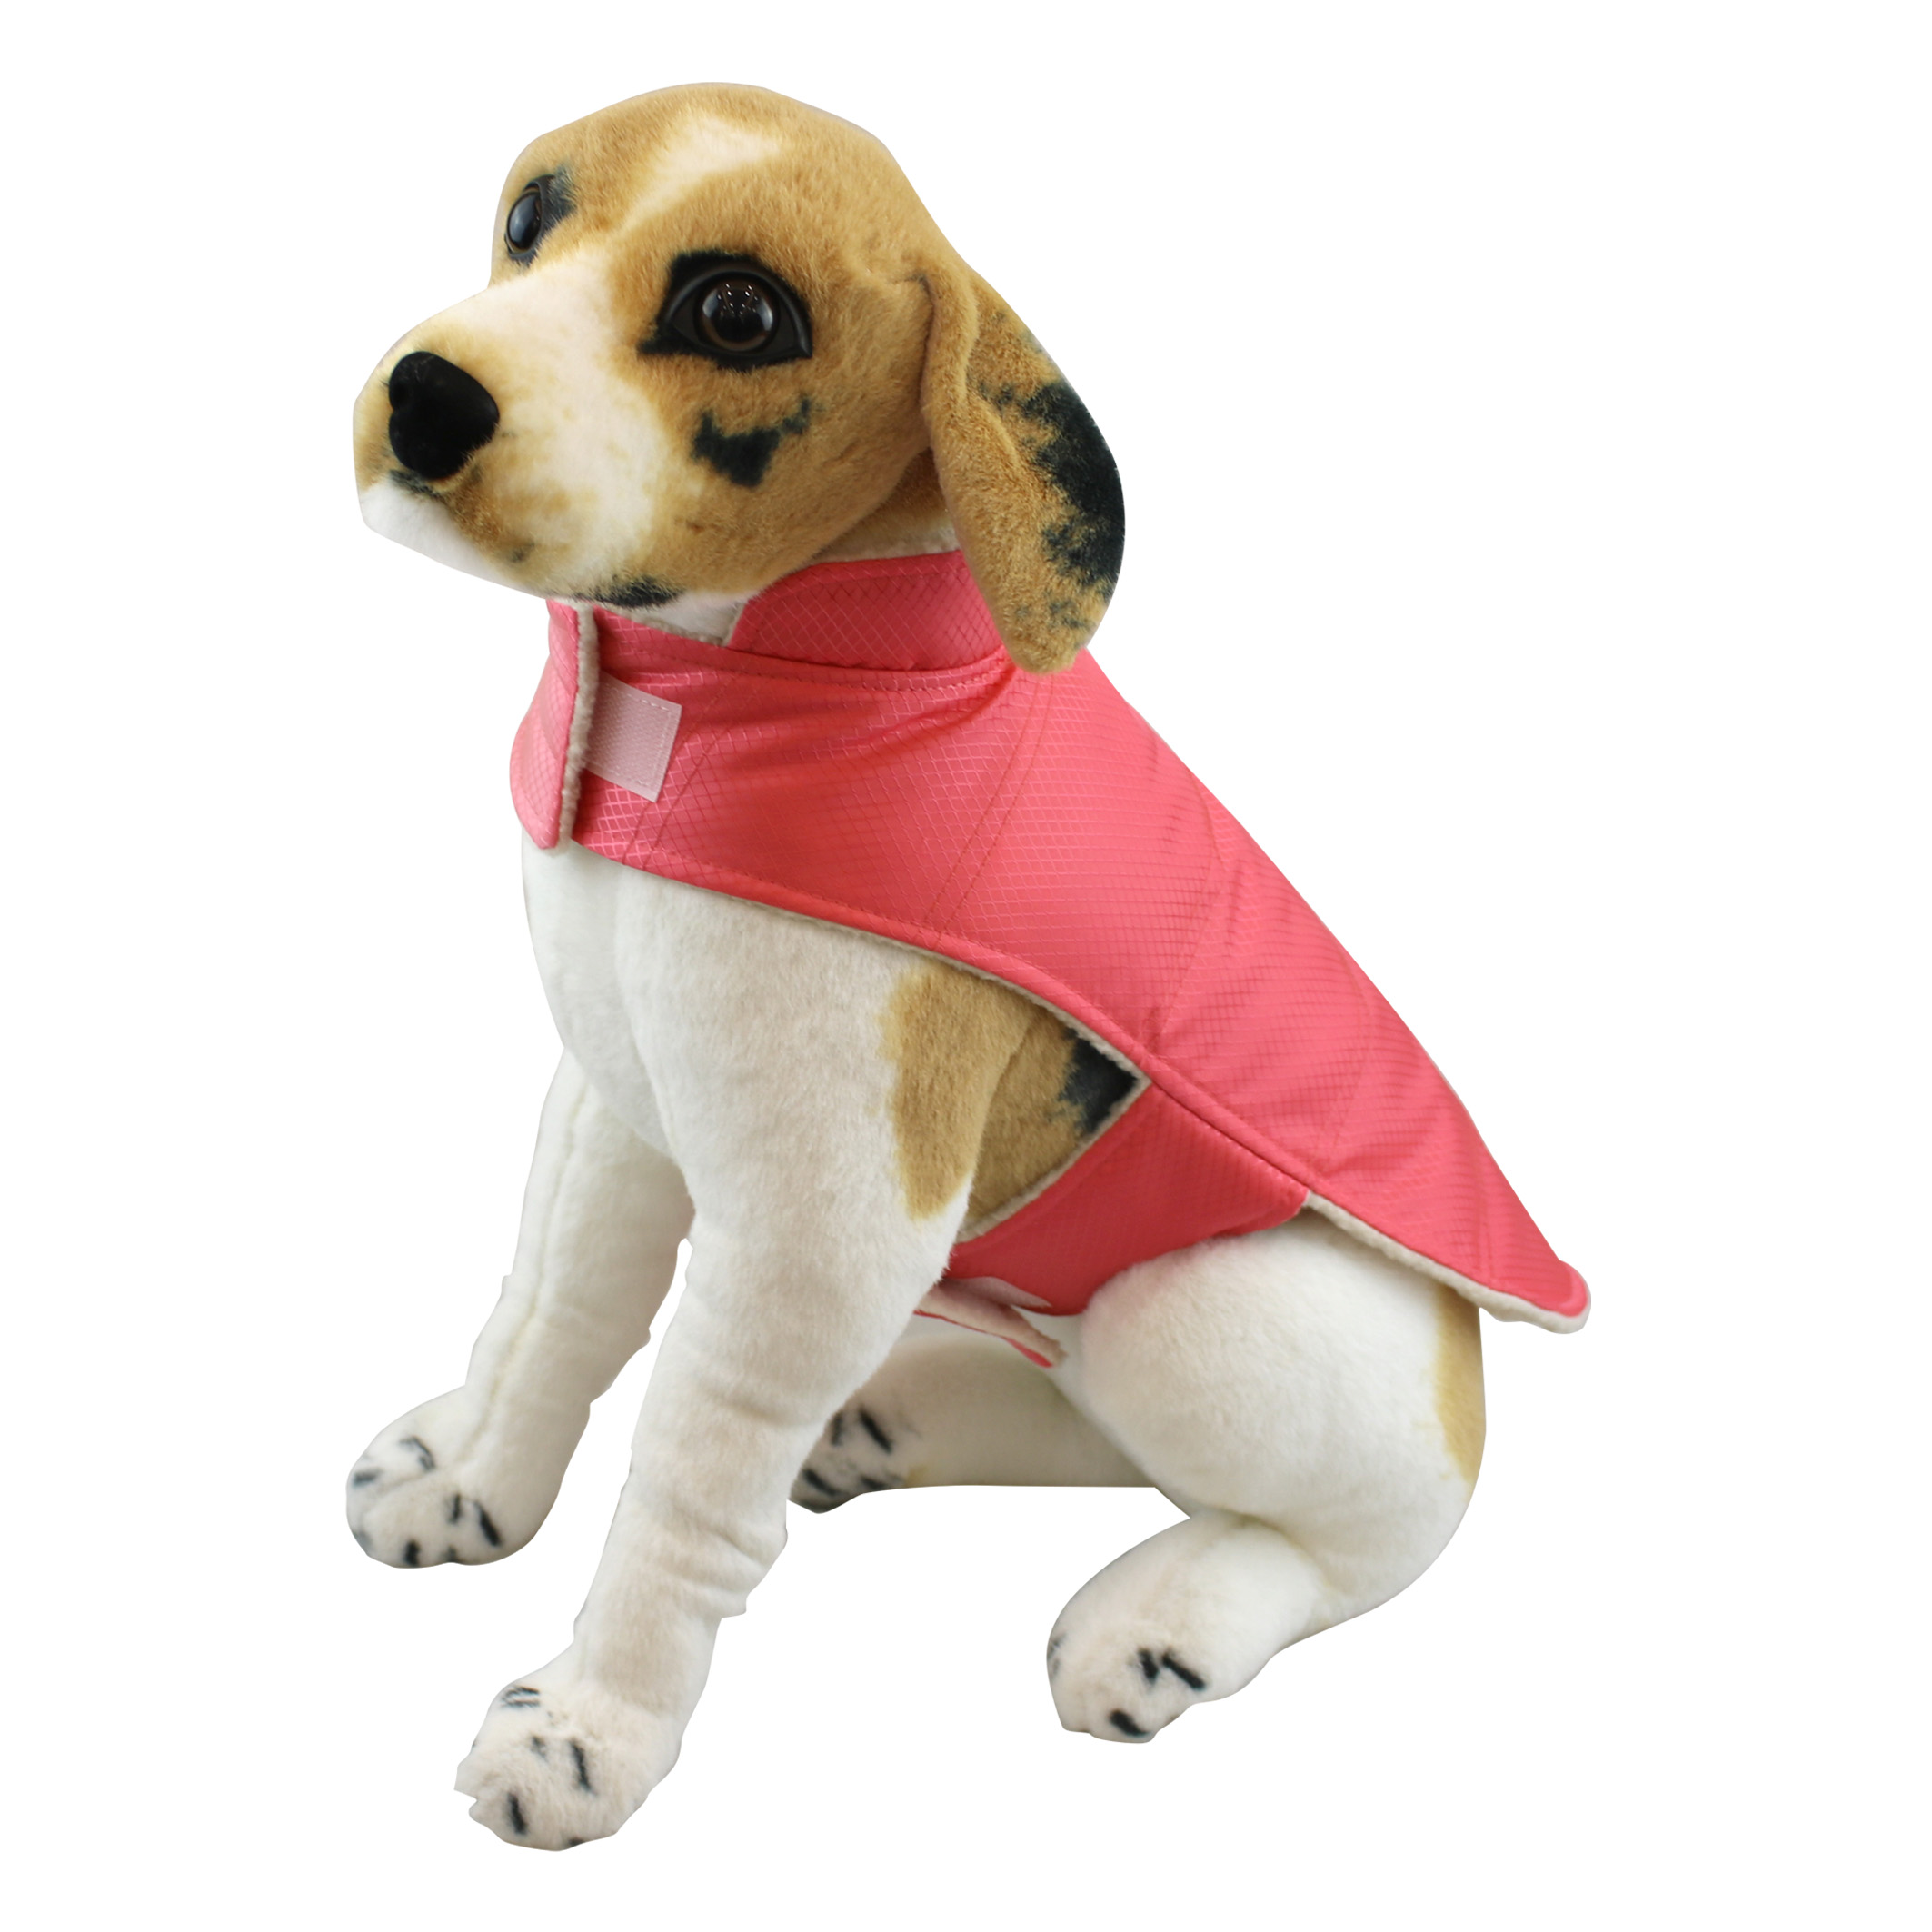 2021 new product release QDP2020RX-1 100% RPET material Waterproof cotton pink pet jacket for Pet Apparel Clothes